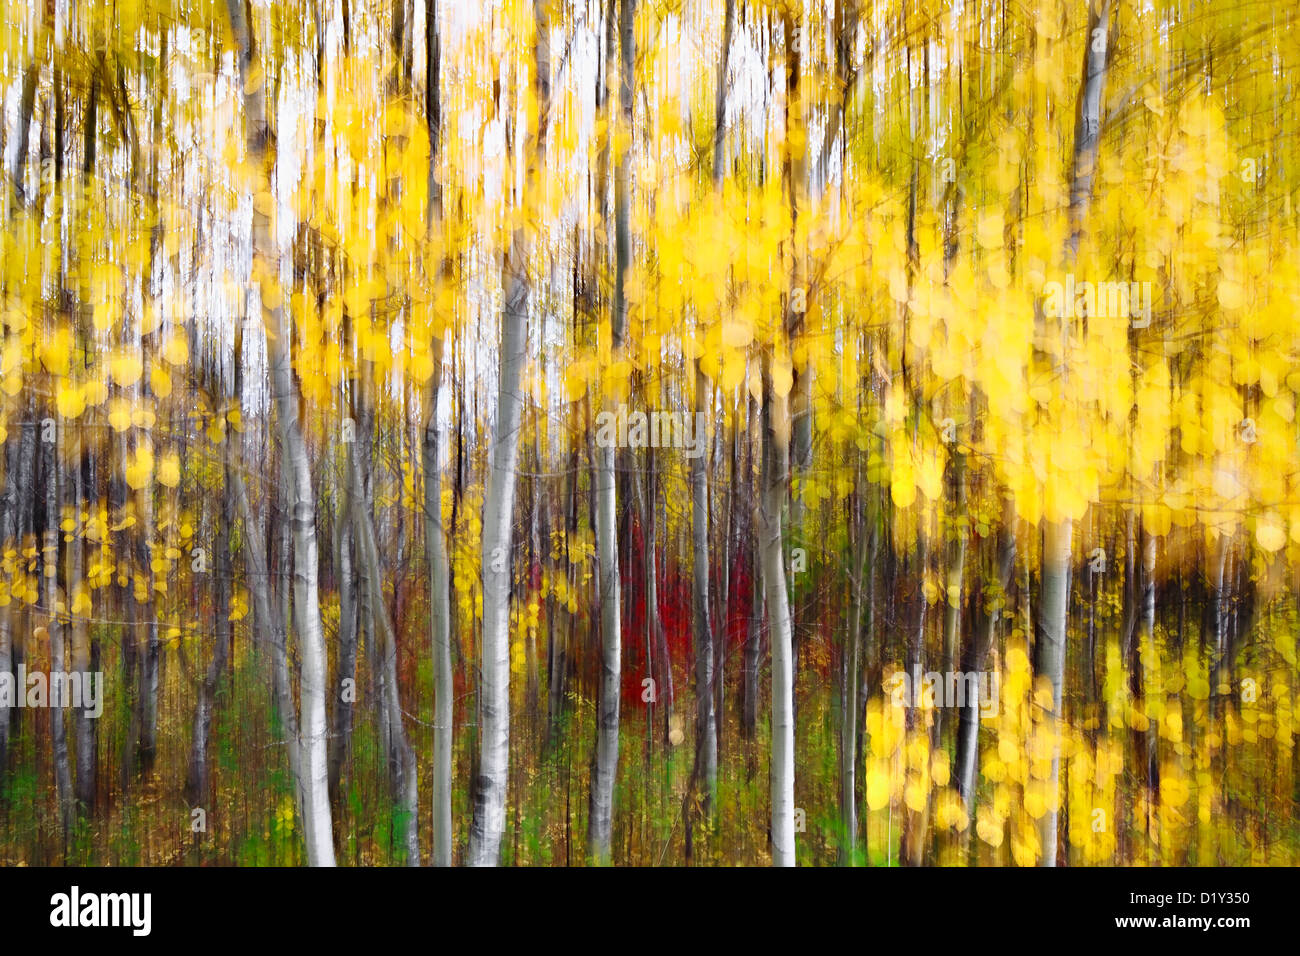 Trembling Aspen trees in autumn colors, abstract. Stock Photo